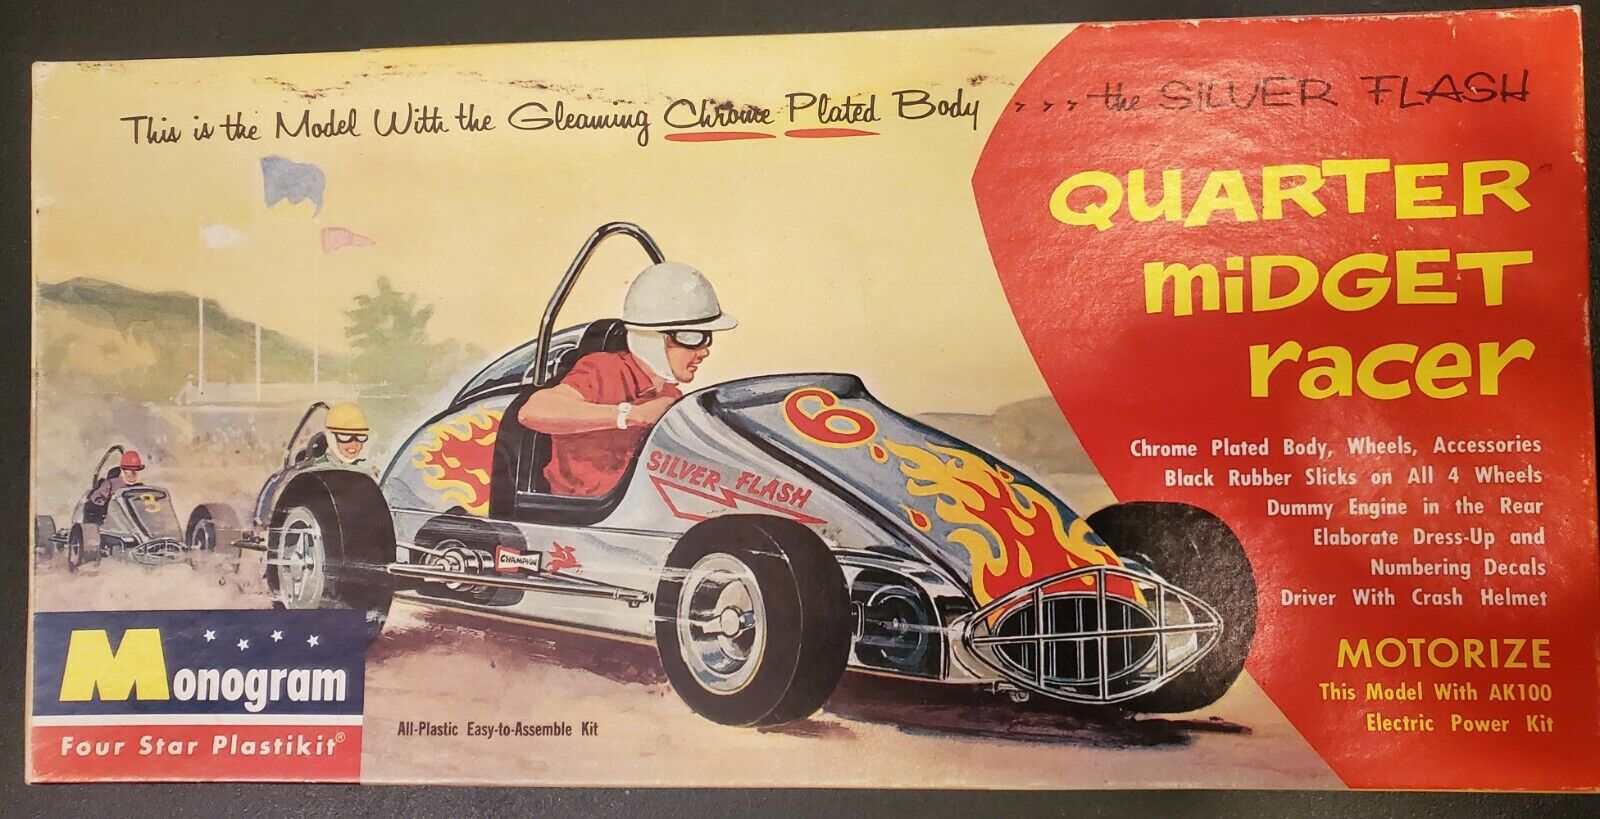 *BOX ONLY* RARE 1/24 kit Monogram "SILVER FLASH" Quarter Midget Racer Box Only and Manual